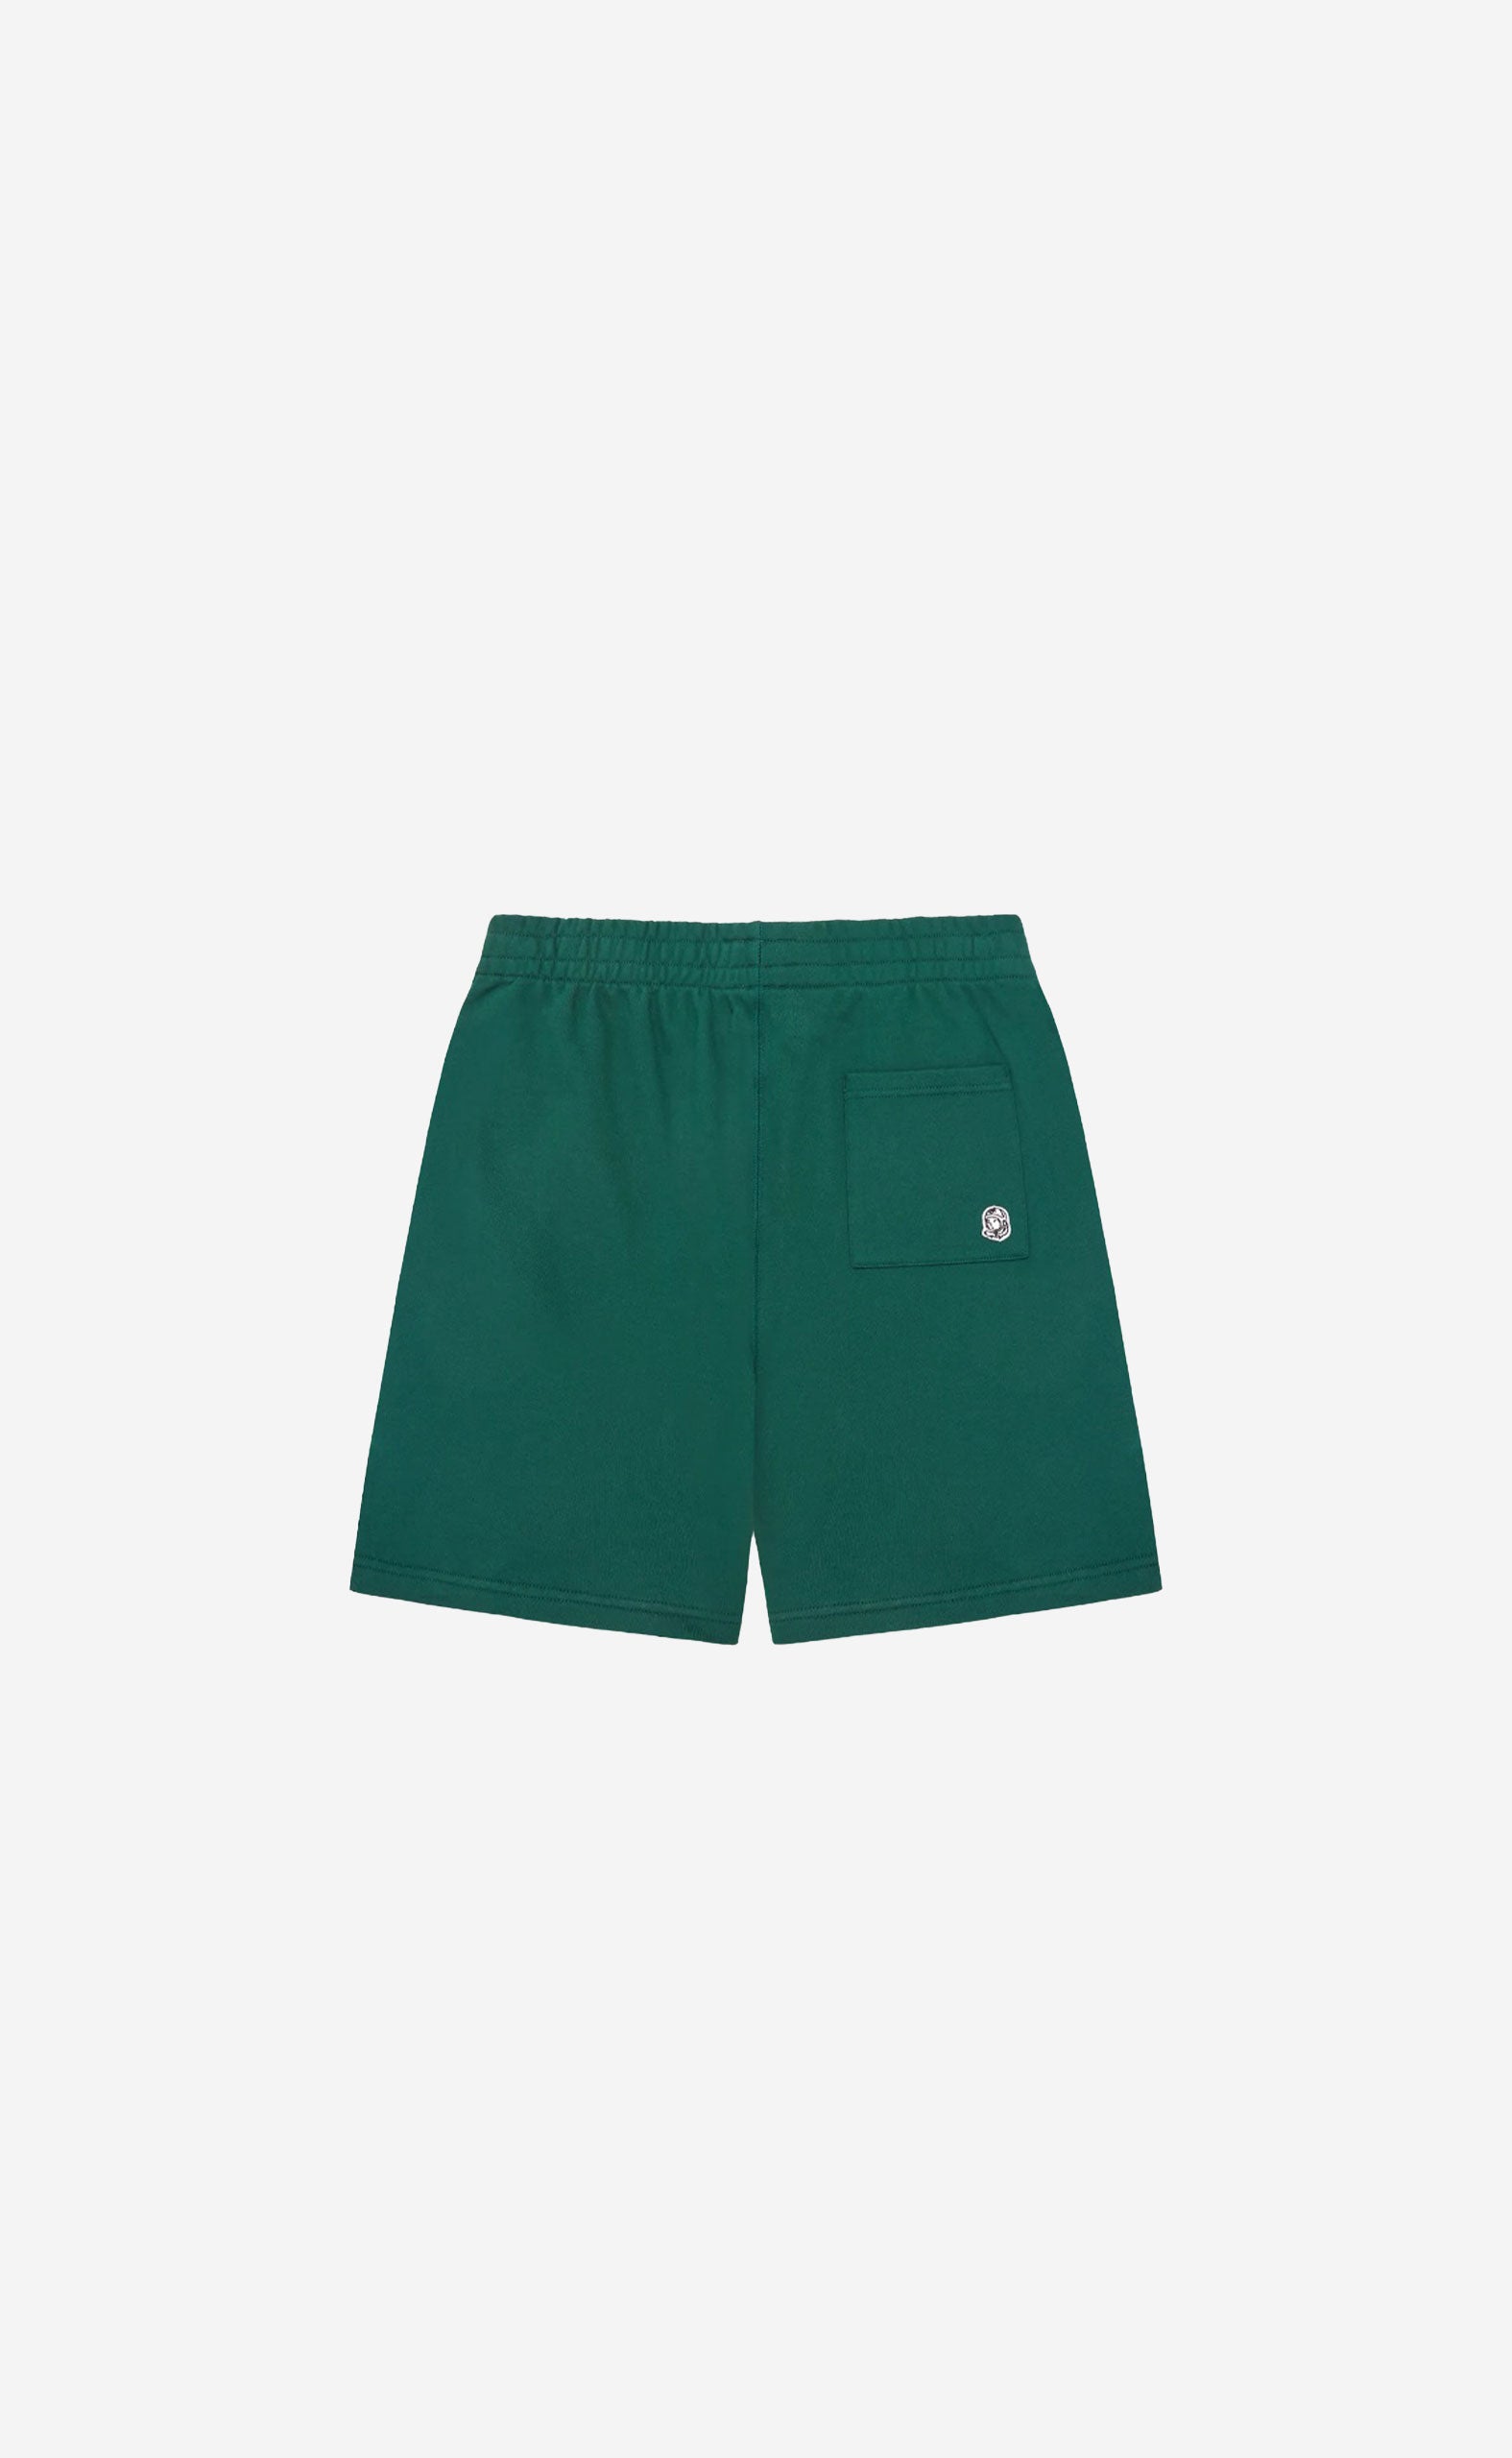 FOREST GREEN SMALL ARCH LOGO SHORTS